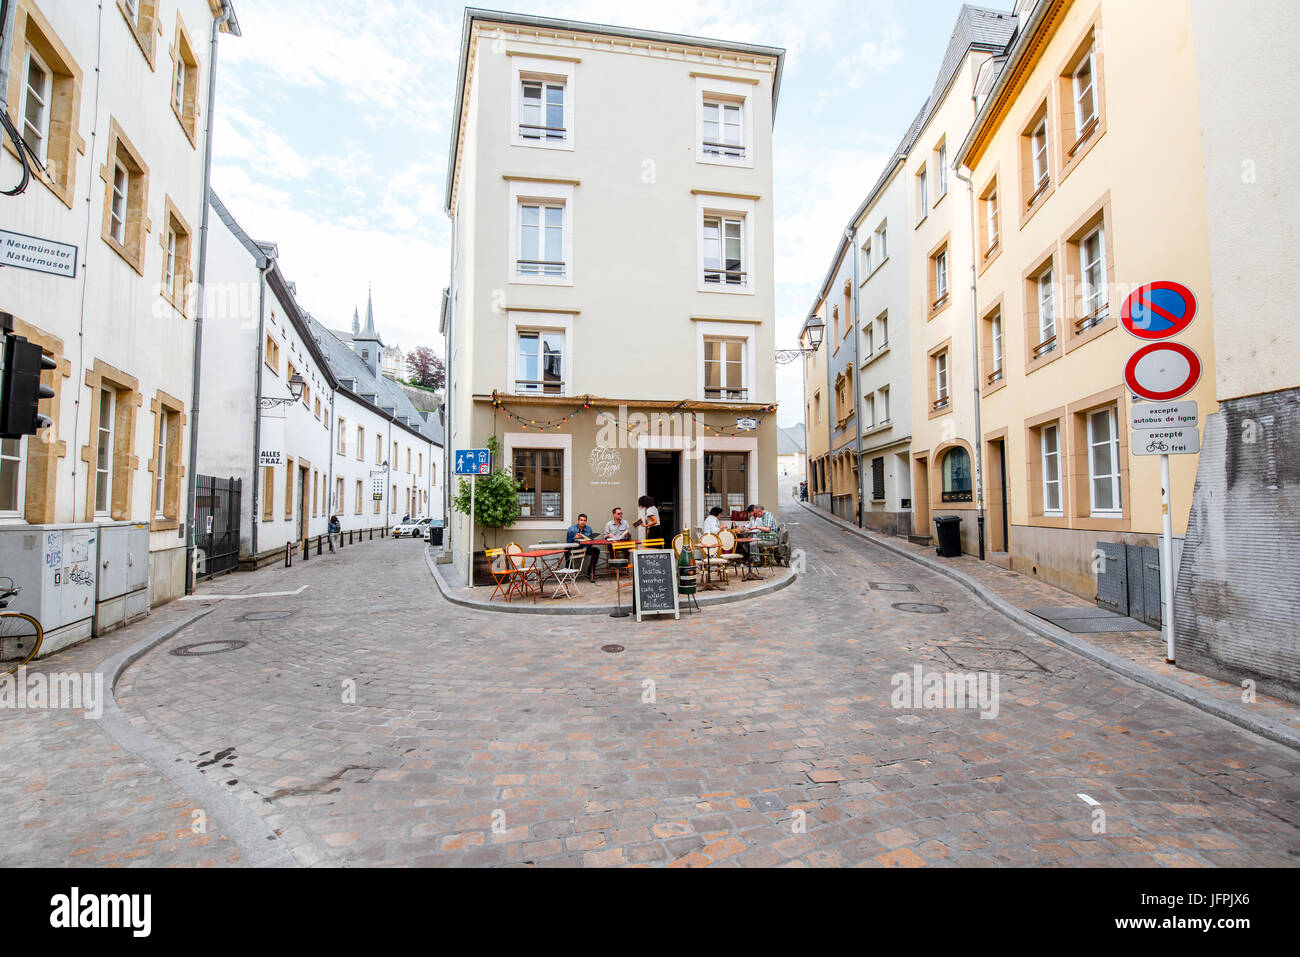 The old town of Luxembourg city Stock Photo